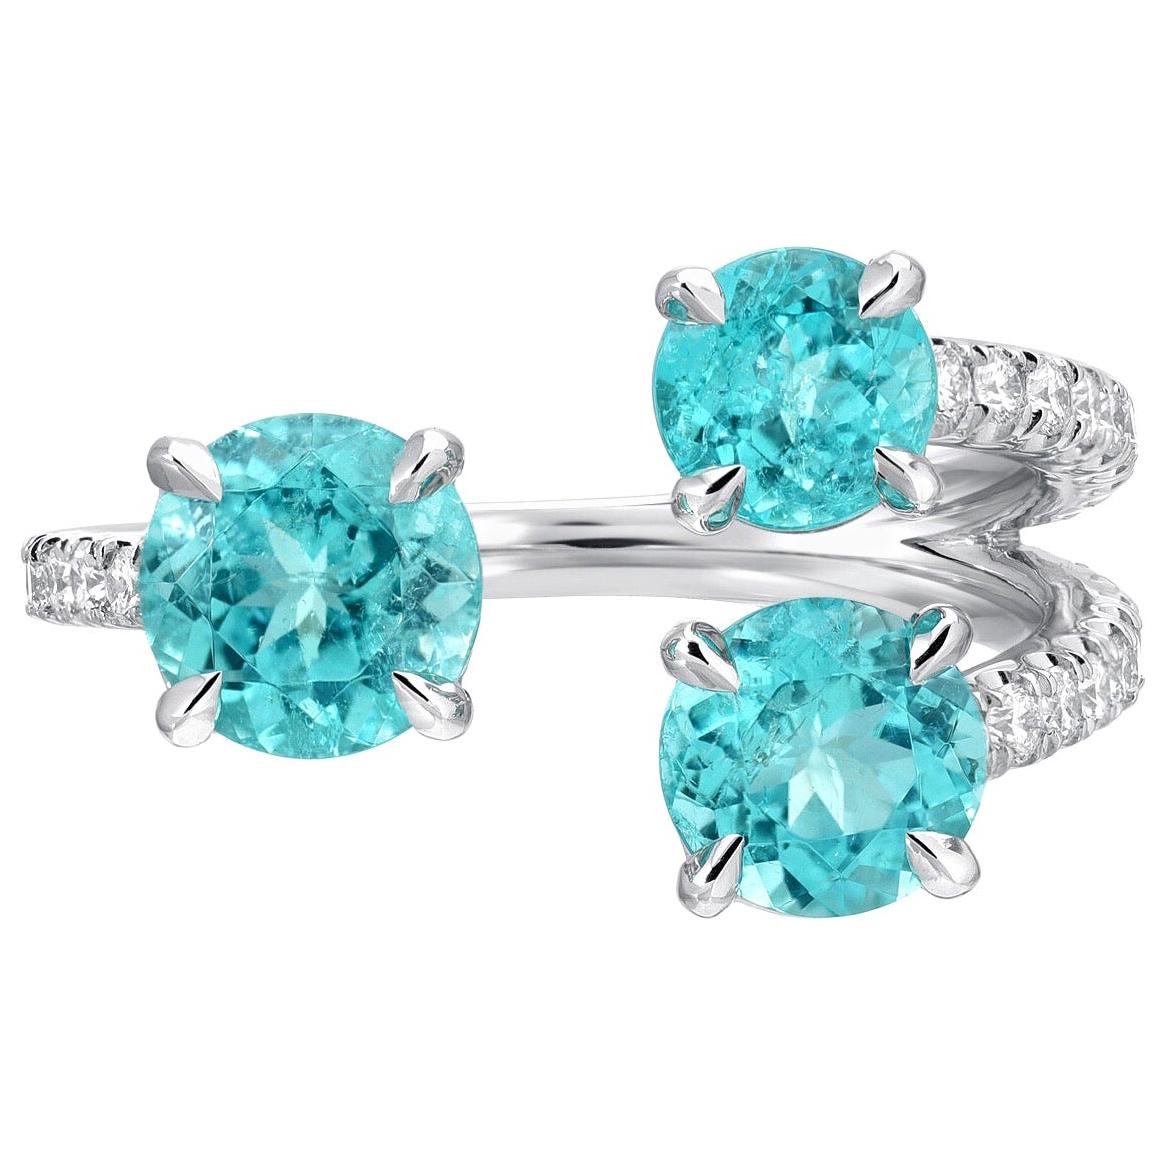 Immensely rare trio, of Brazilian Paraiba Tourmaline rounds, weighing a total of 2.08 carats, are hand set in this dainty and classy platinum cocktail ring, adorned by a total of 0.51 carats of round brilliant diamonds.
AGL certificates are